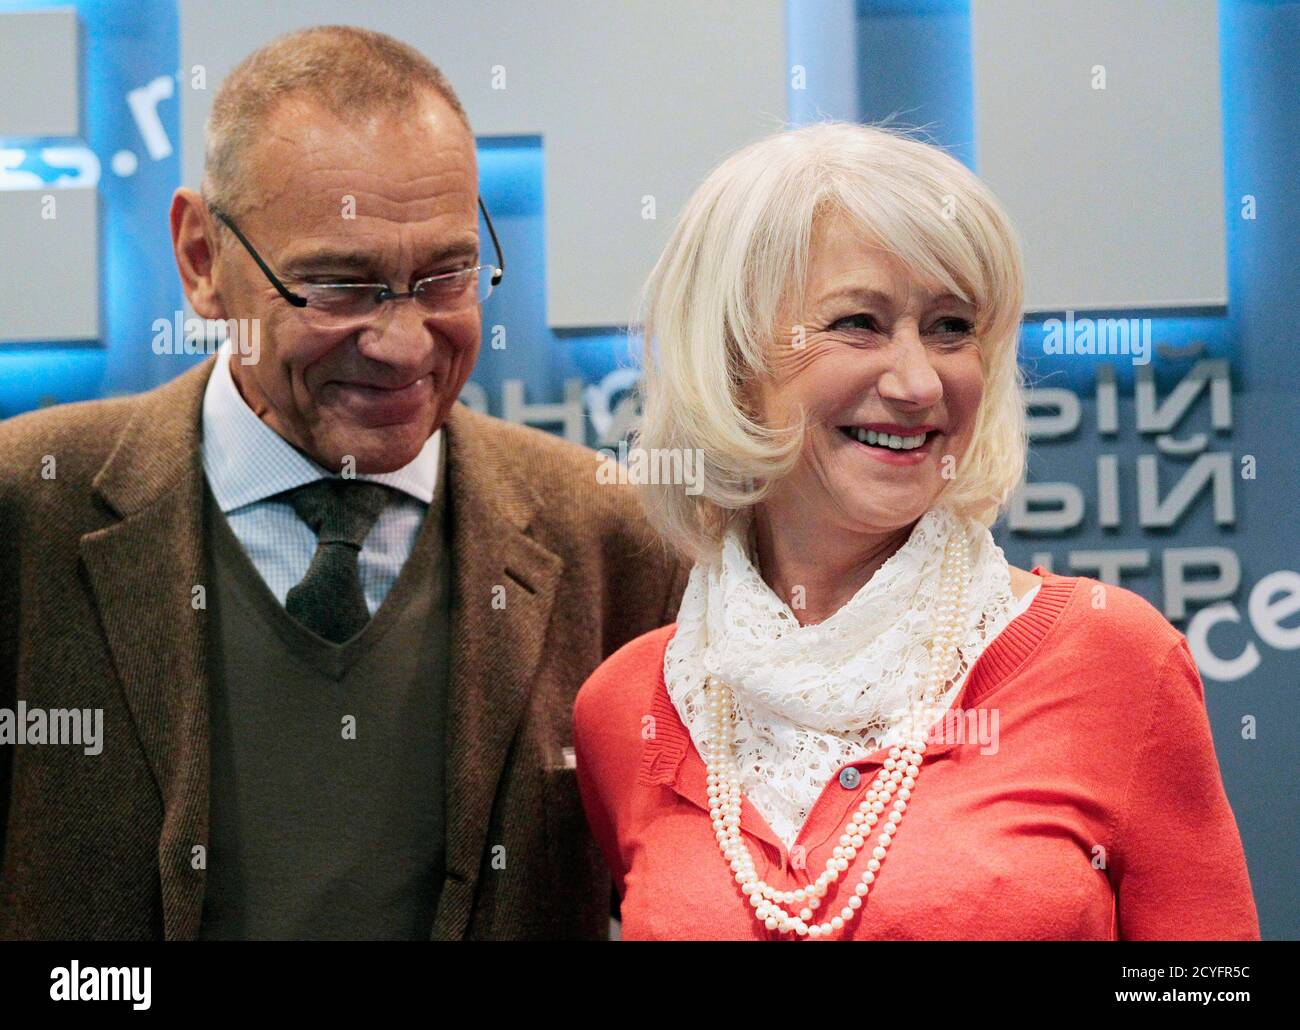 Andrey Konchalovsky High Resolution Stock Photography and Images - Alamy